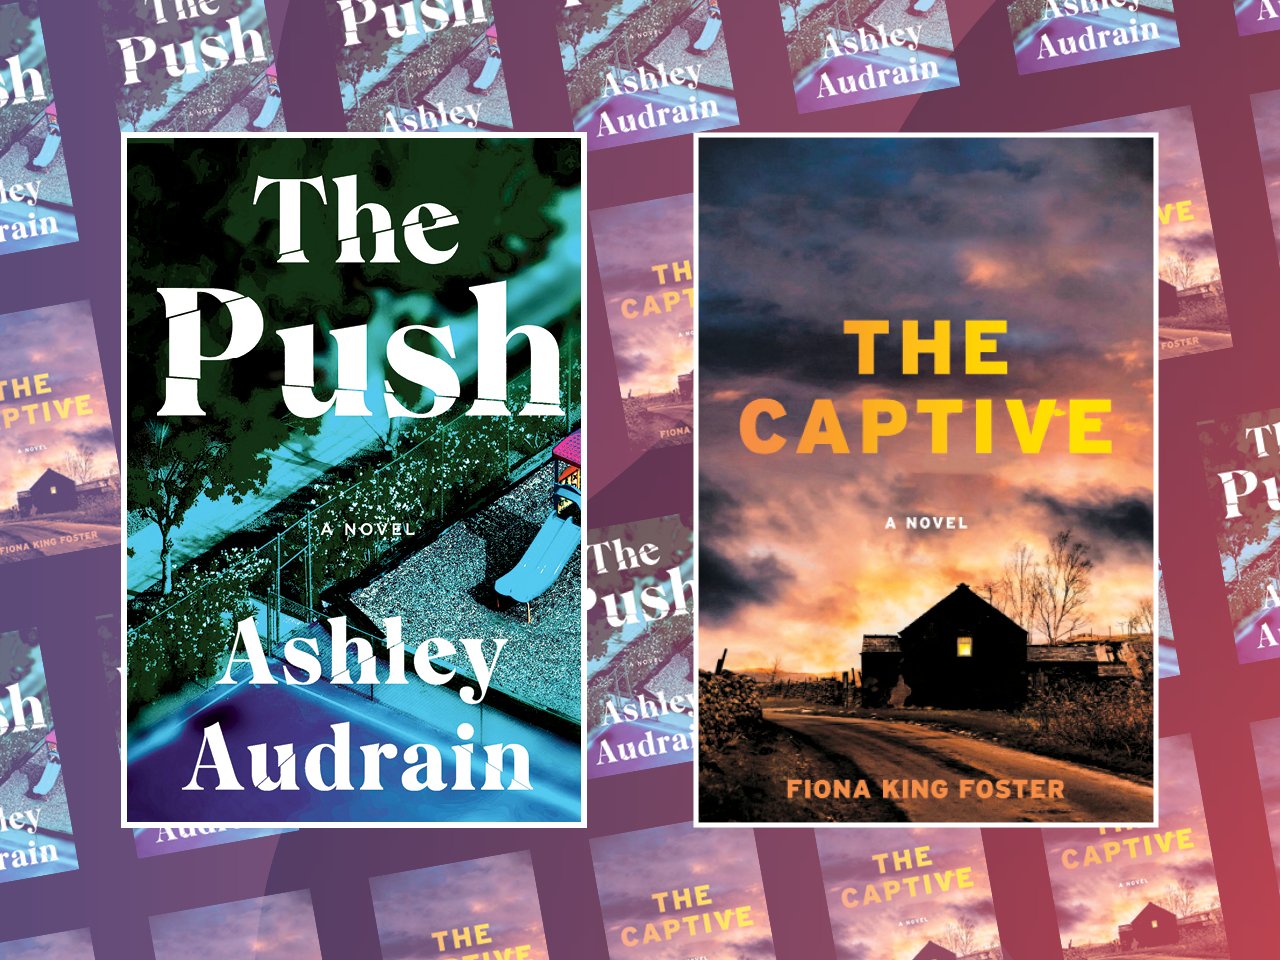 The covers of the books The Push and The Captive